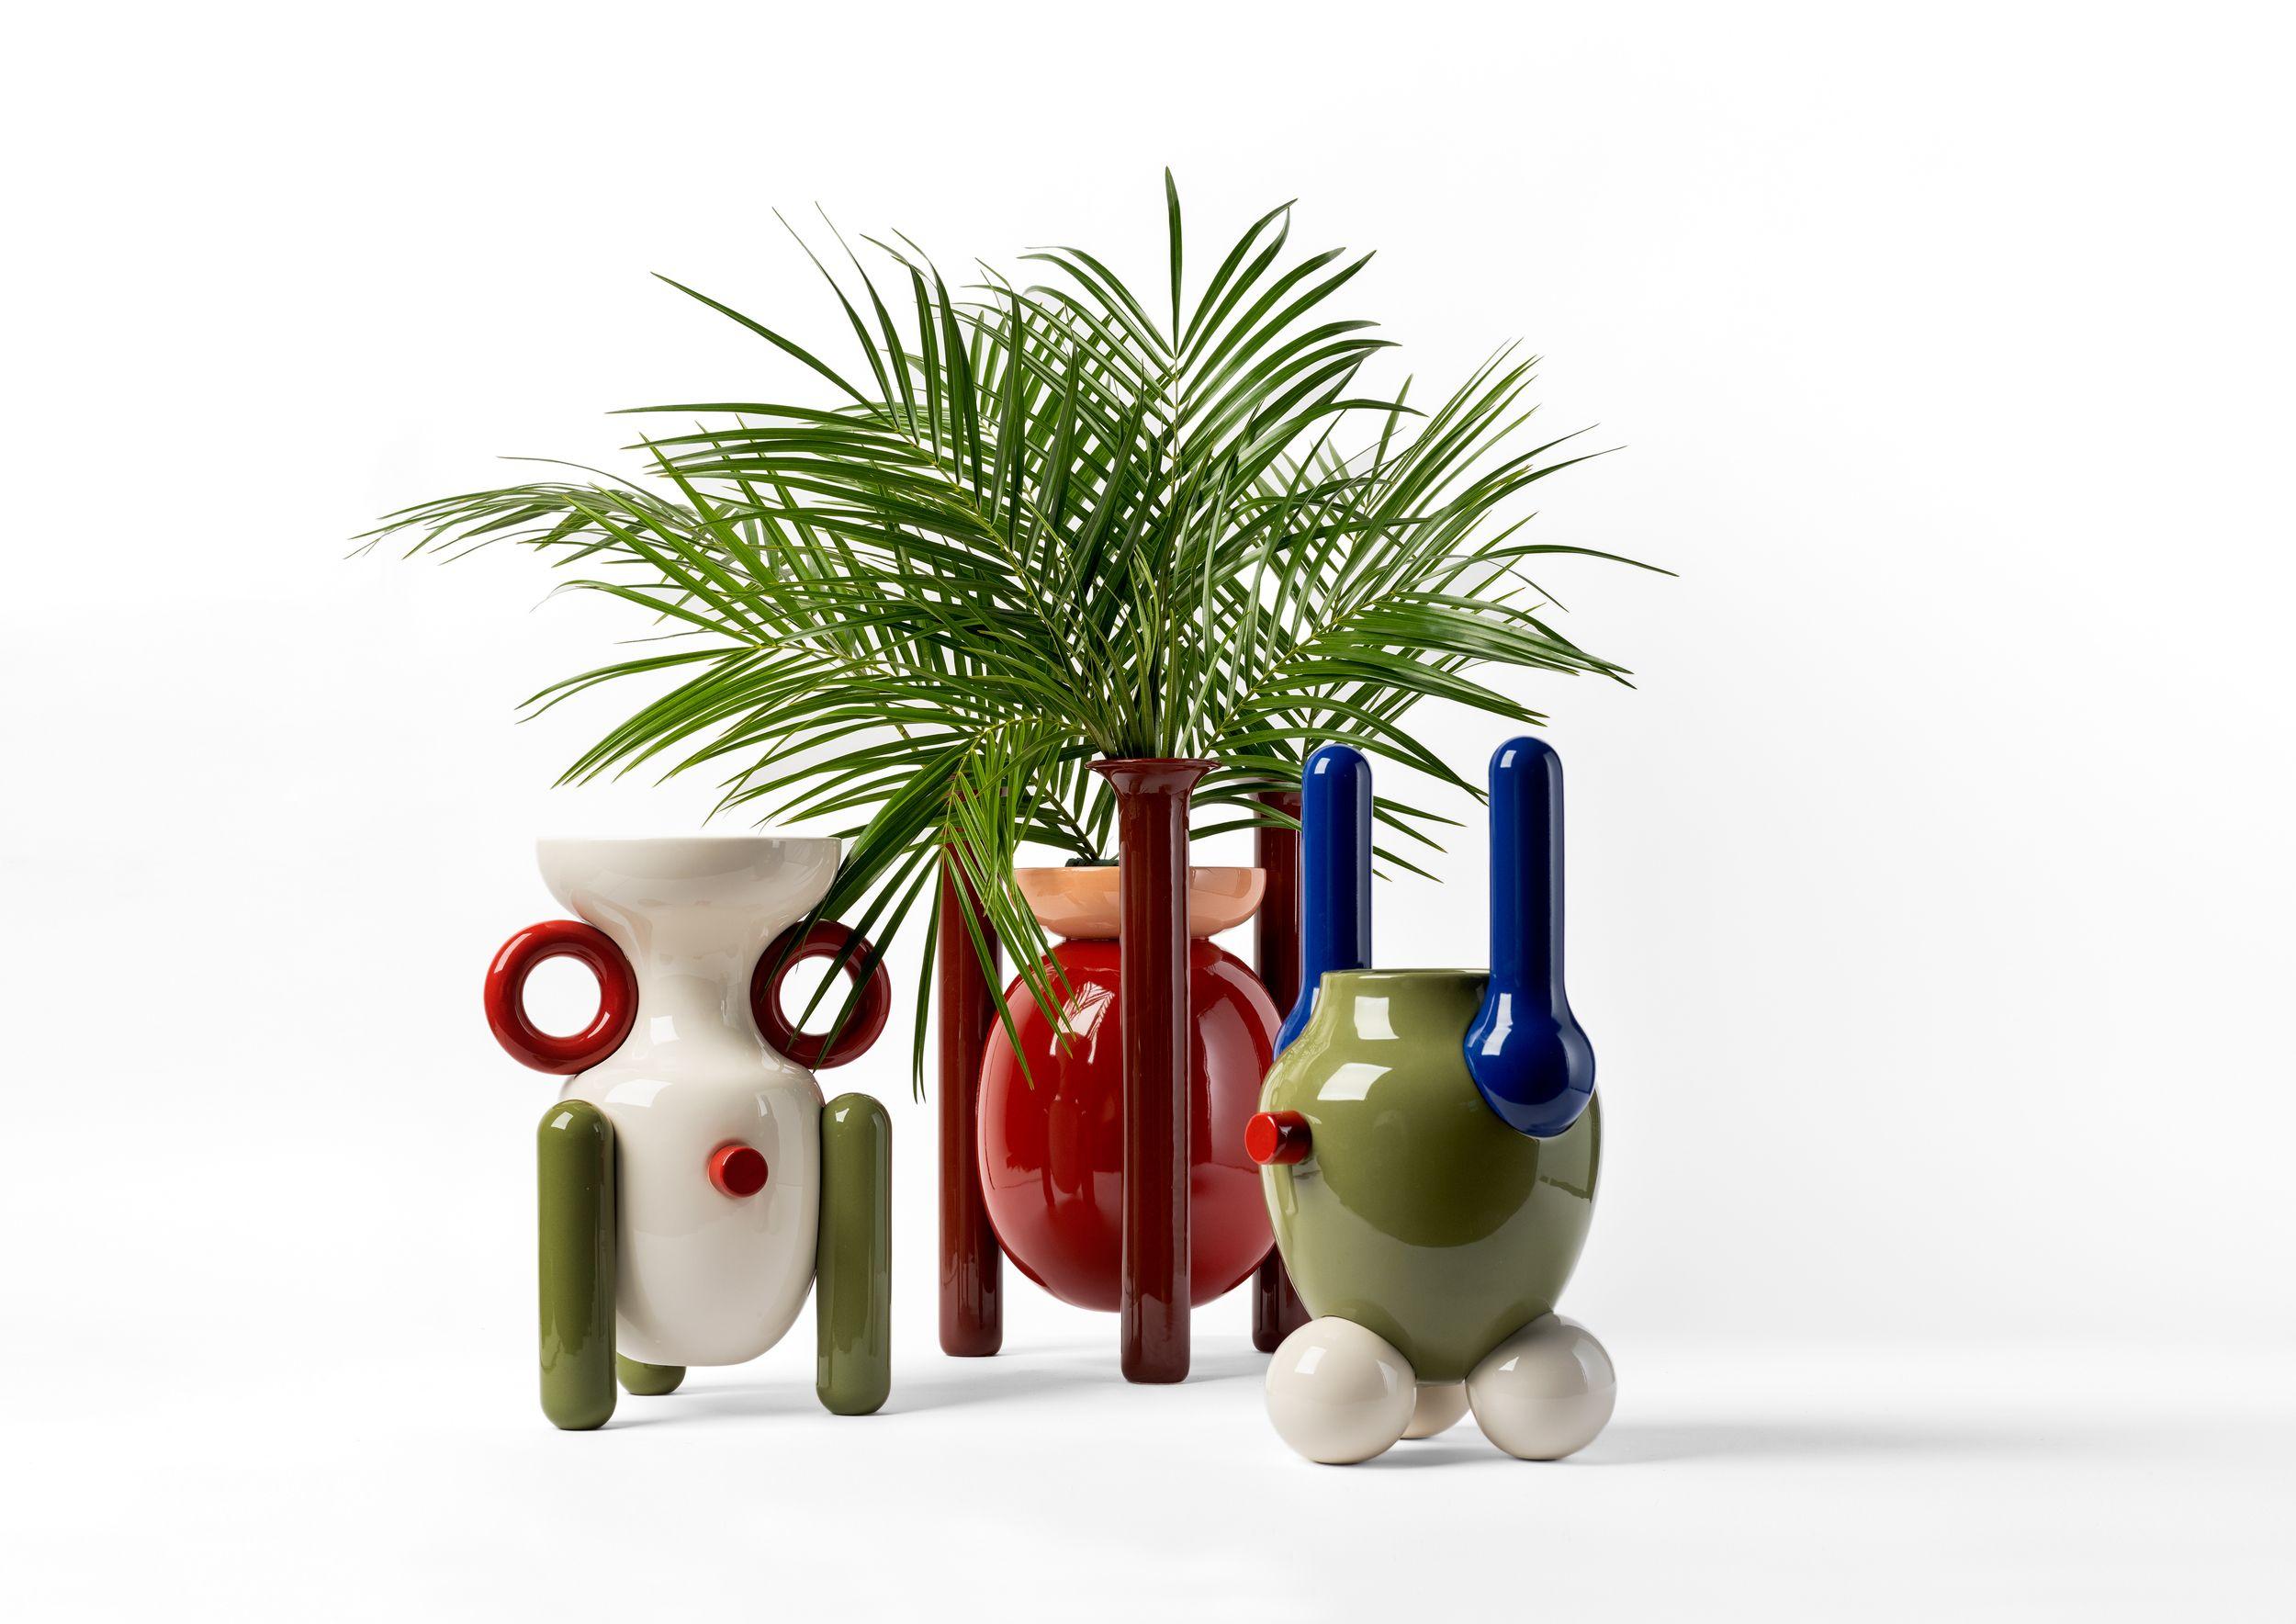 Set of 3 Contemporary Glazed Ceramic Vases, Explorer Collection by Jaime Hayon For Sale 2